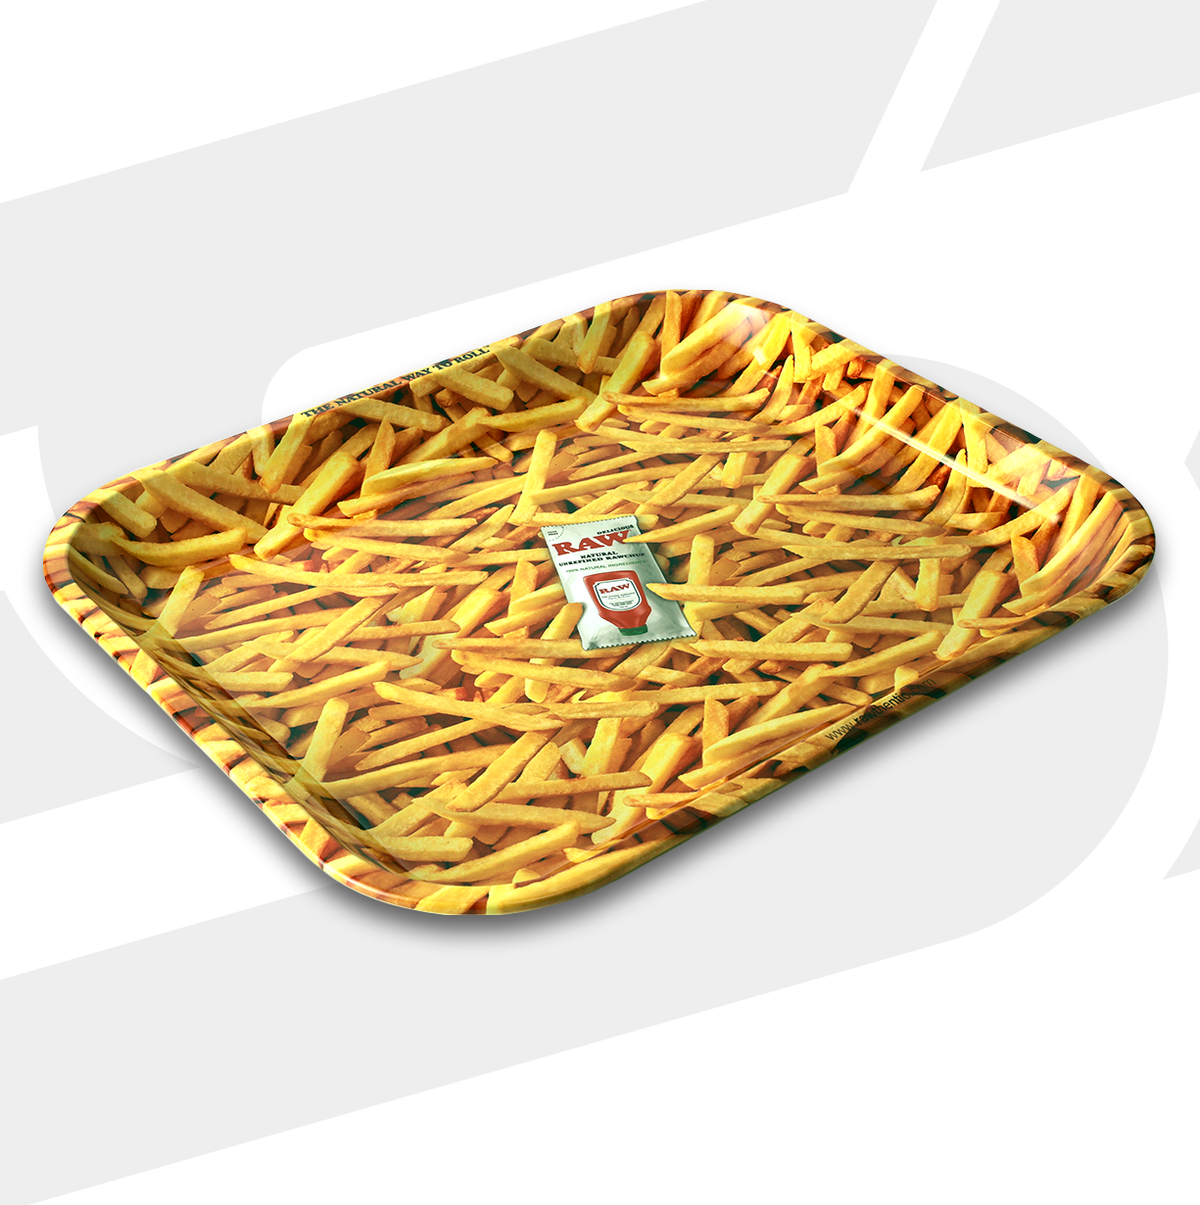 RAW French Fries Rolling Tray Rolling Trays esd-official